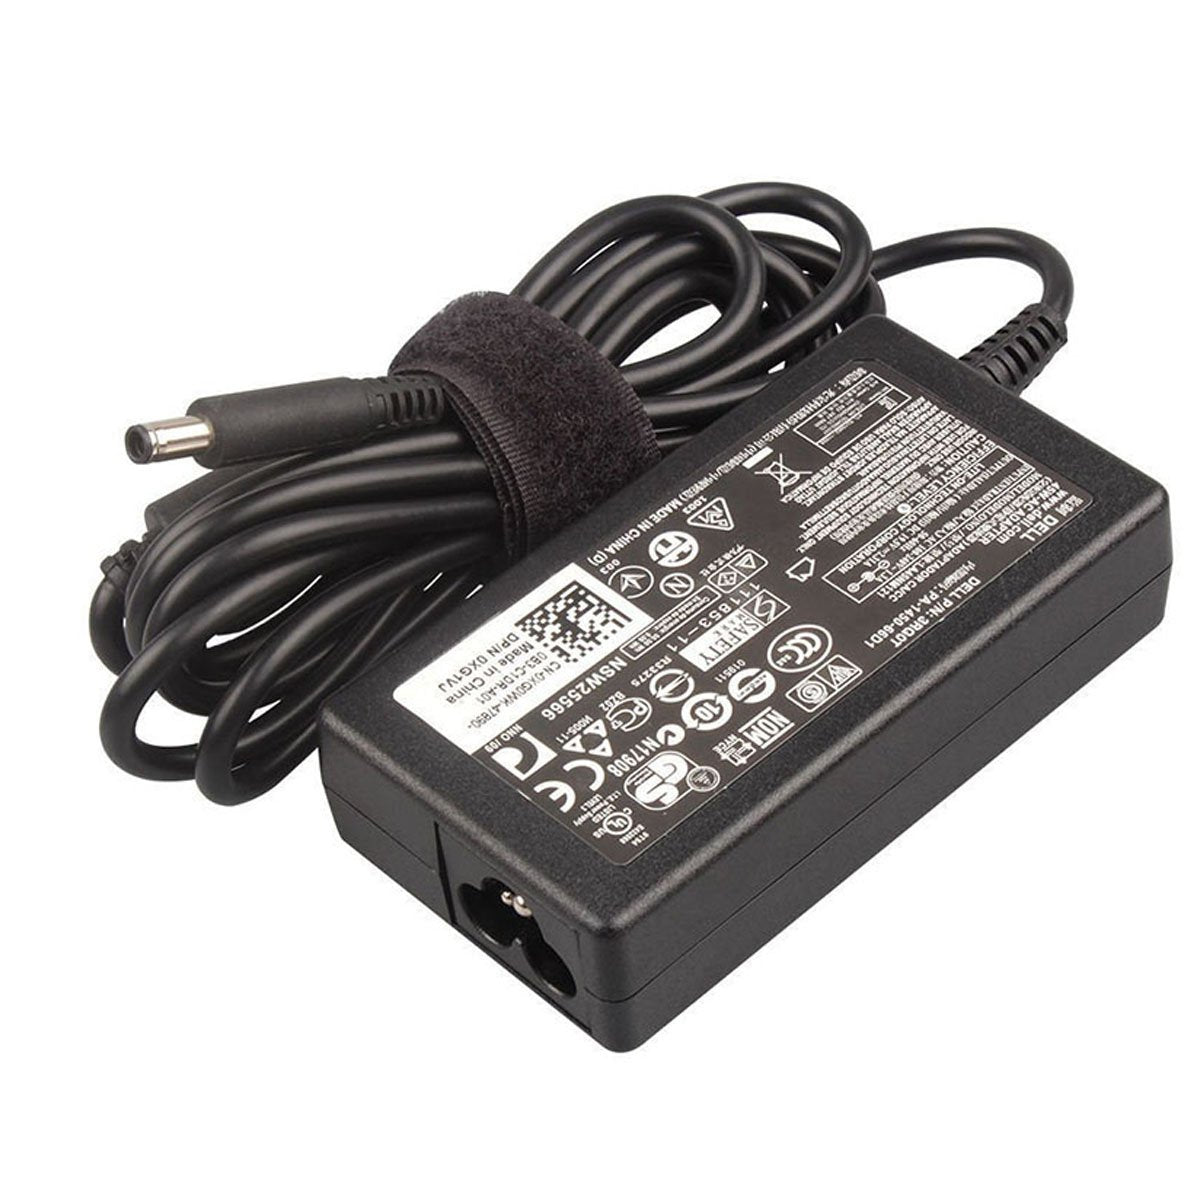 Dell Original 45W 19.5V 4.5mm Pin Laptop Charger Adapter for Inspiron 13 7359 With Power Cord